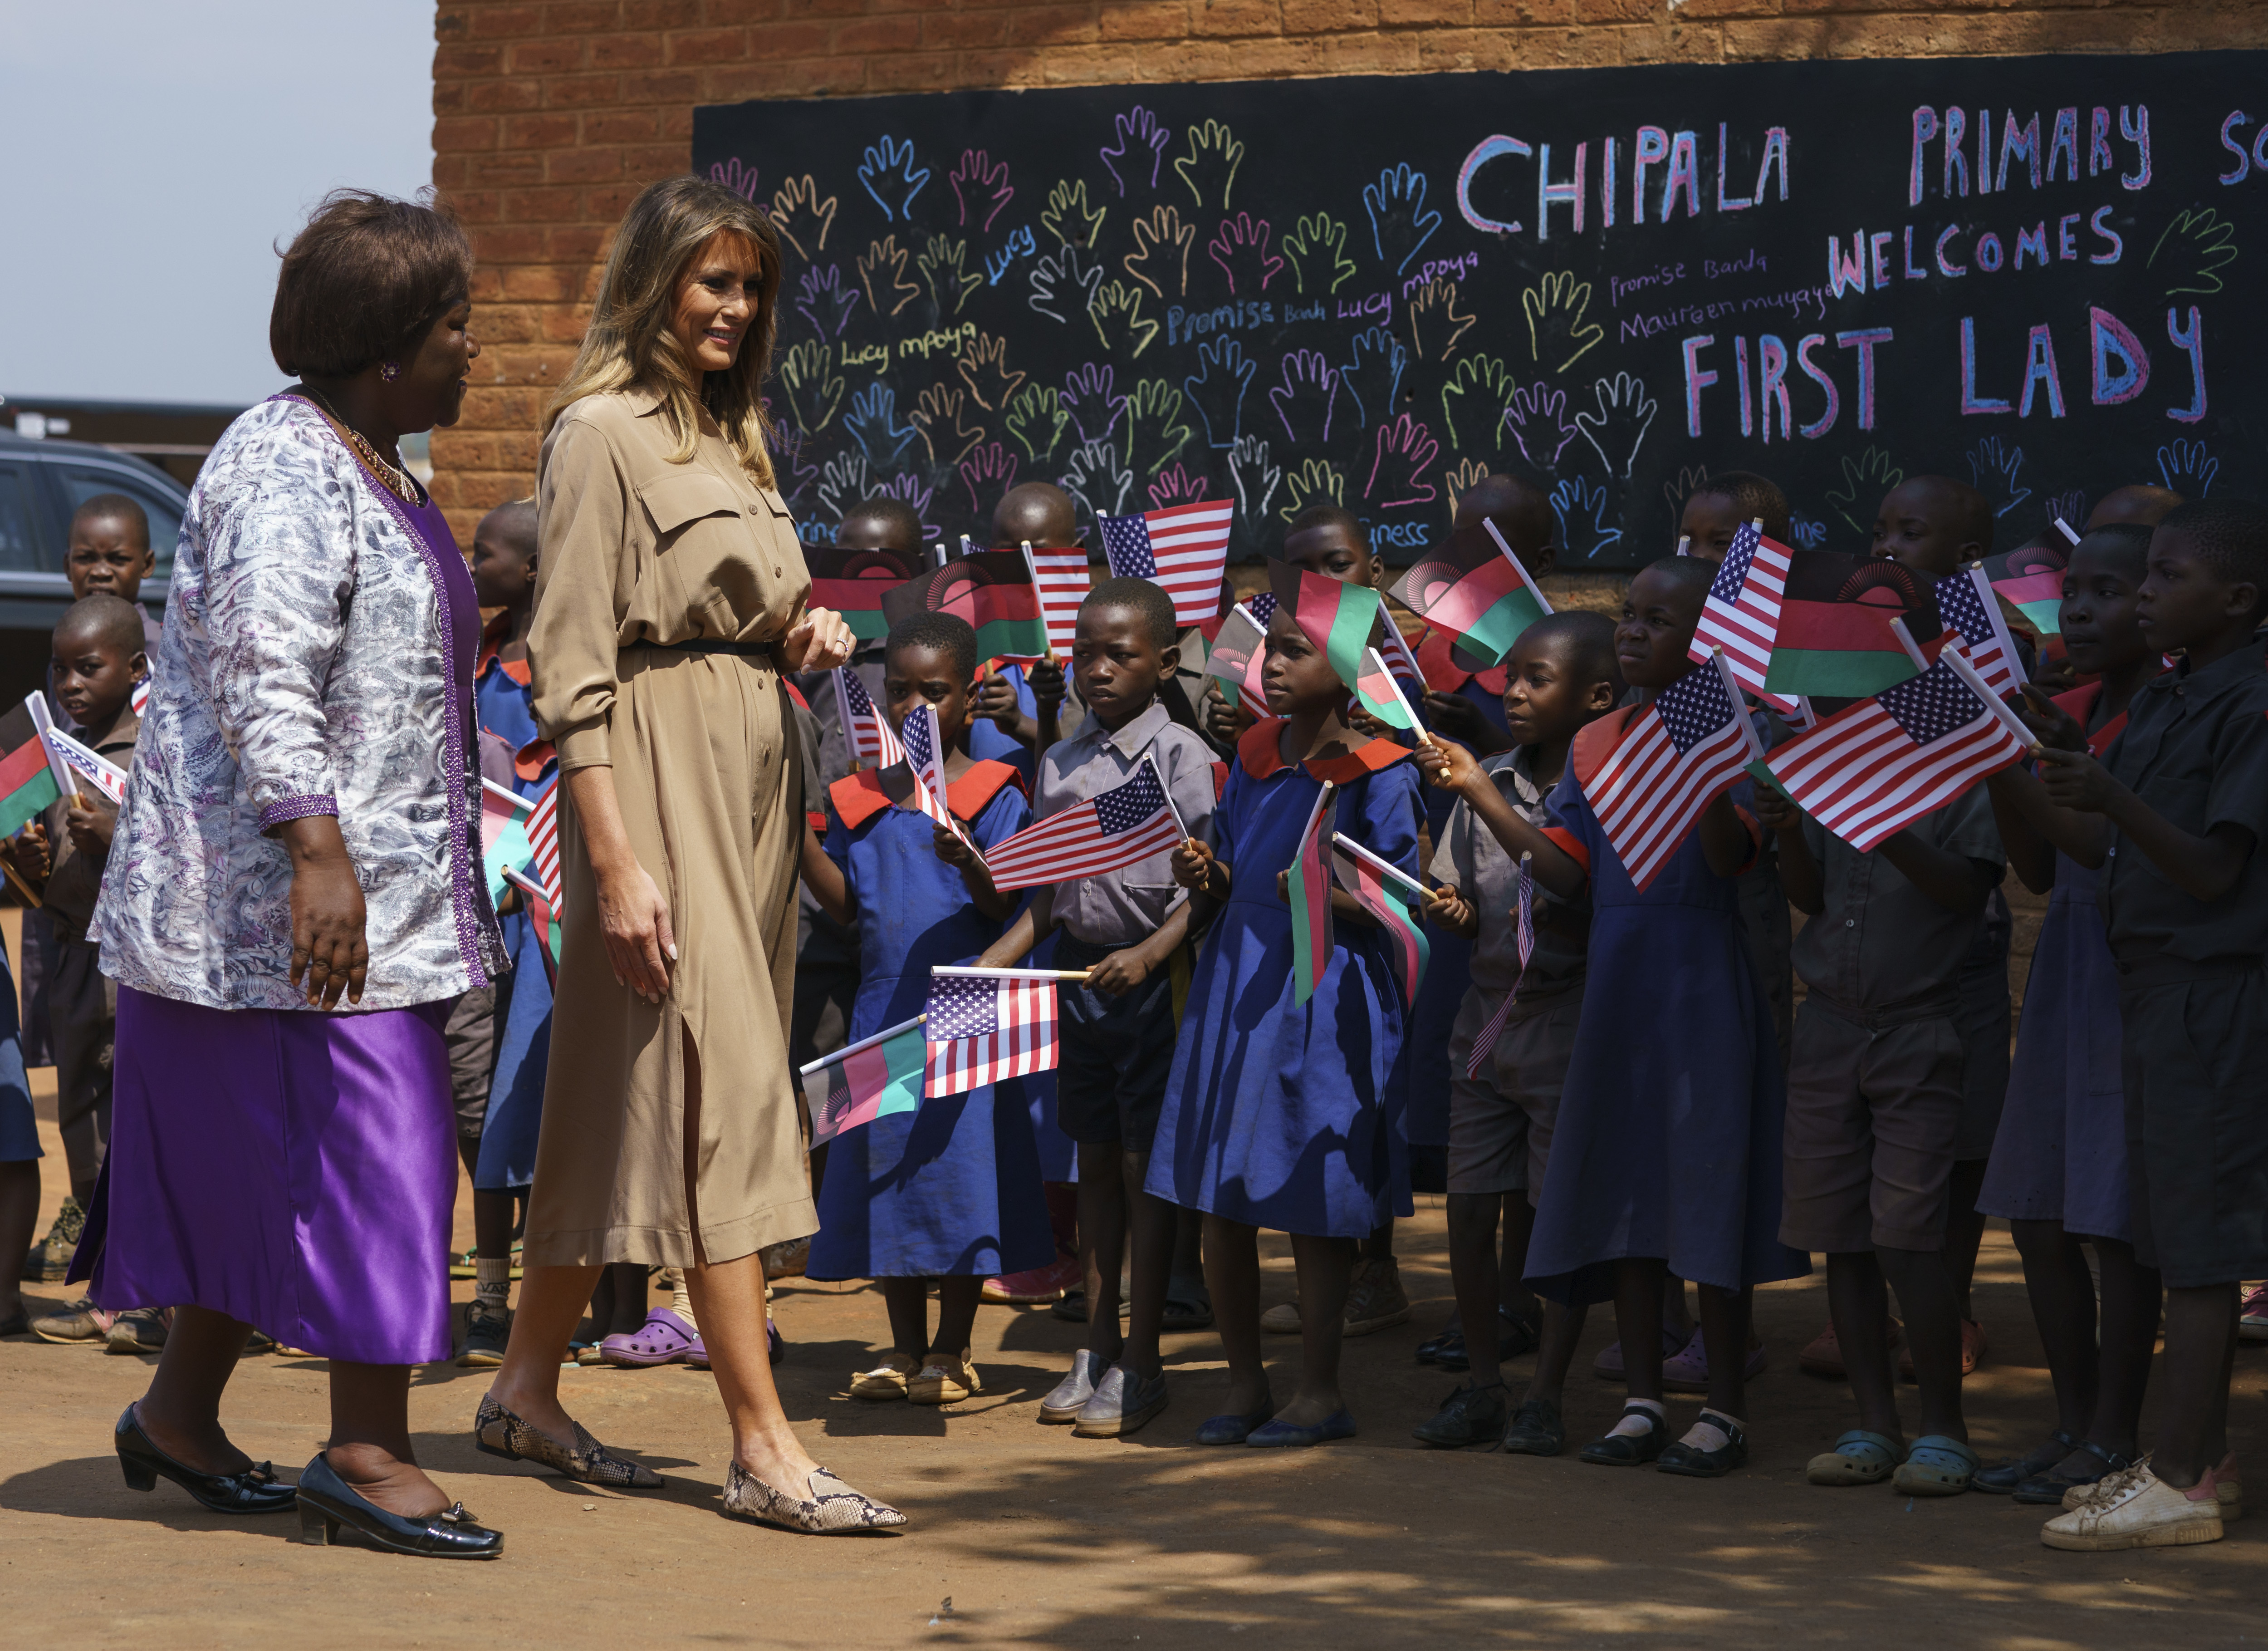 First lady Melania Trump is escorted by head teacher Maureen Masi as she visits Chipala Primary School in Lilongwe, Malawi